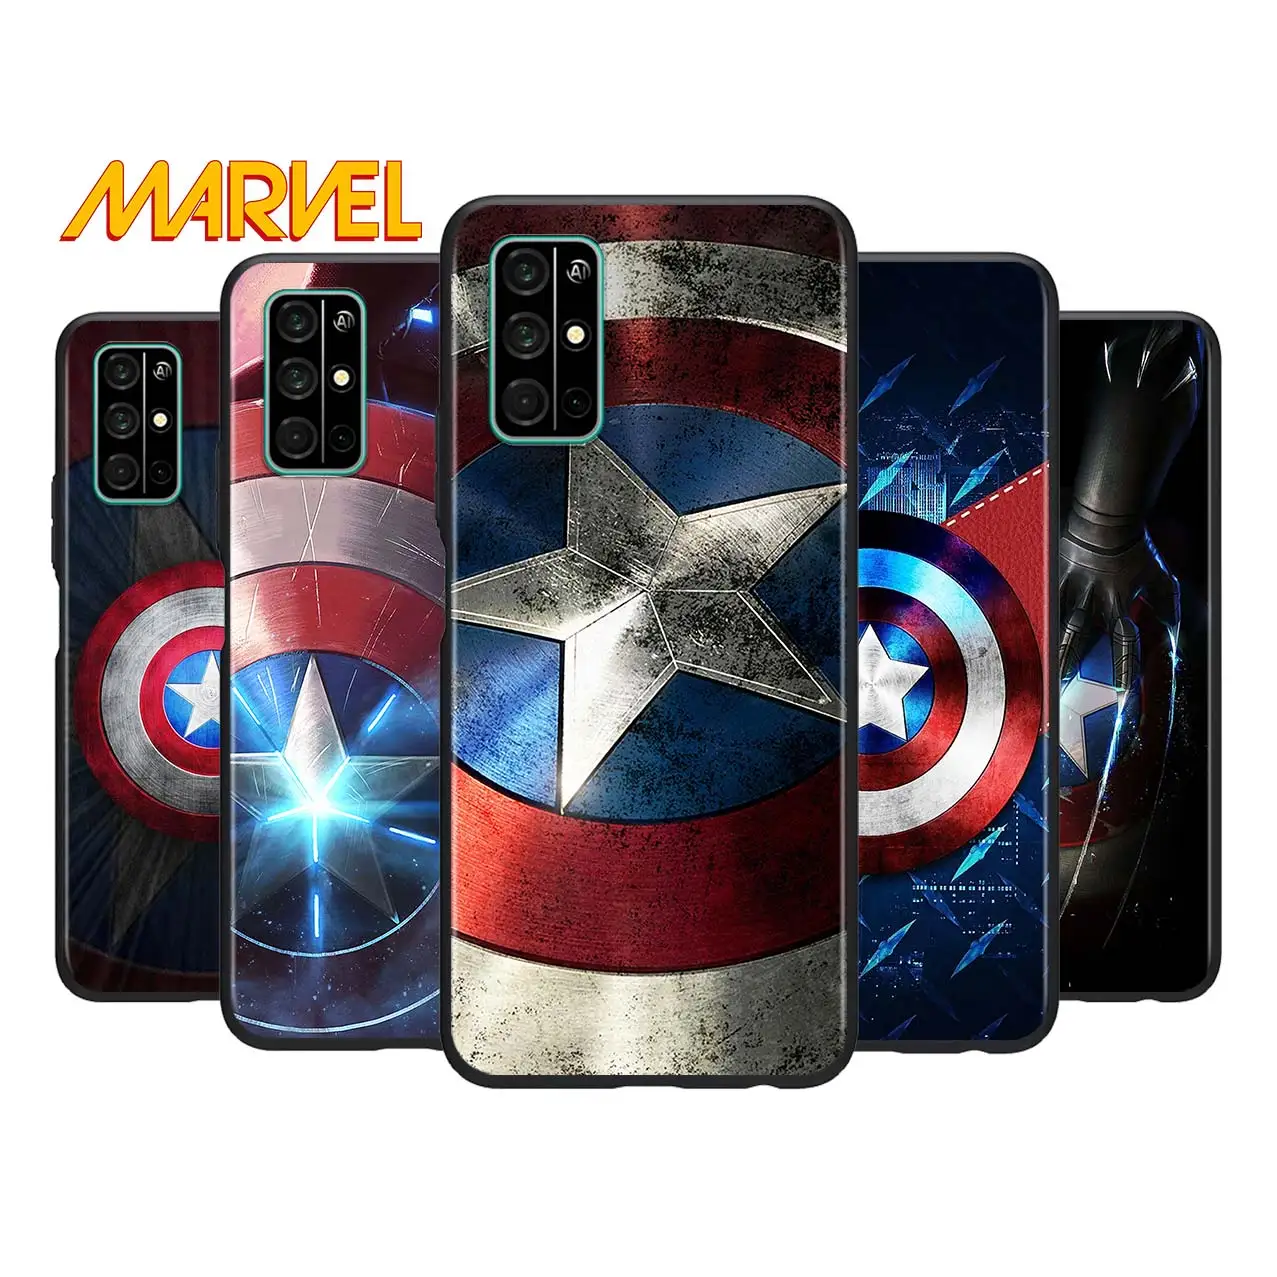 

Shield captain america marvel for Huawei Honor V30 20 Pro X10 9S 9A 9C 9X 8X 10 9 Lite 8A 7C 7A Pro TPU Soft Black Phone Case